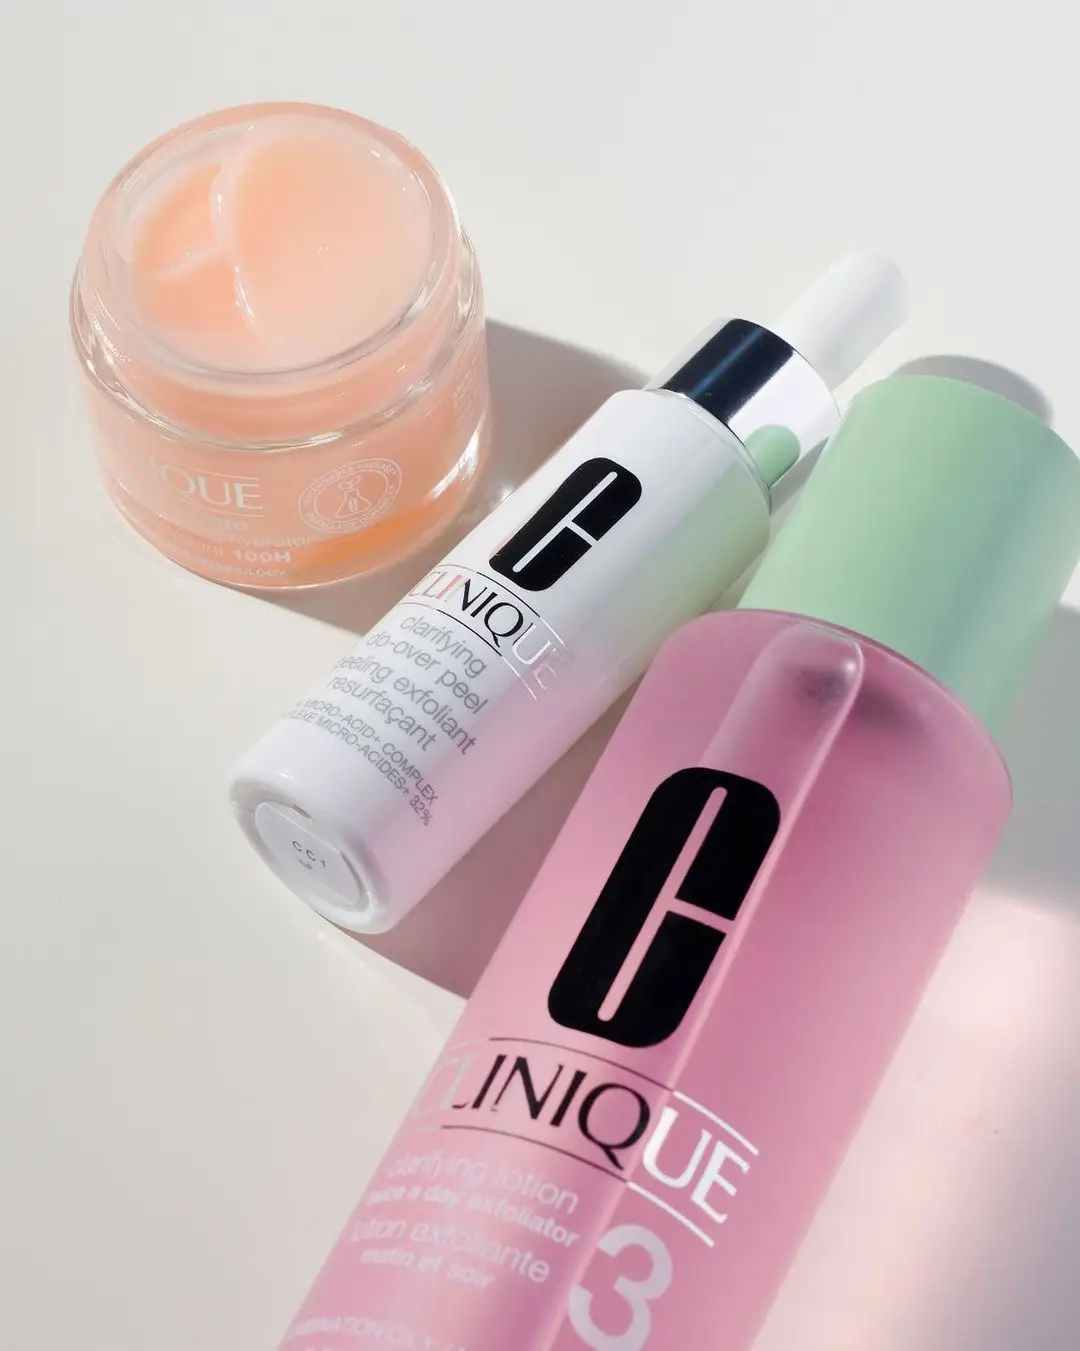 10 Clinique Products That Work Wonders ...